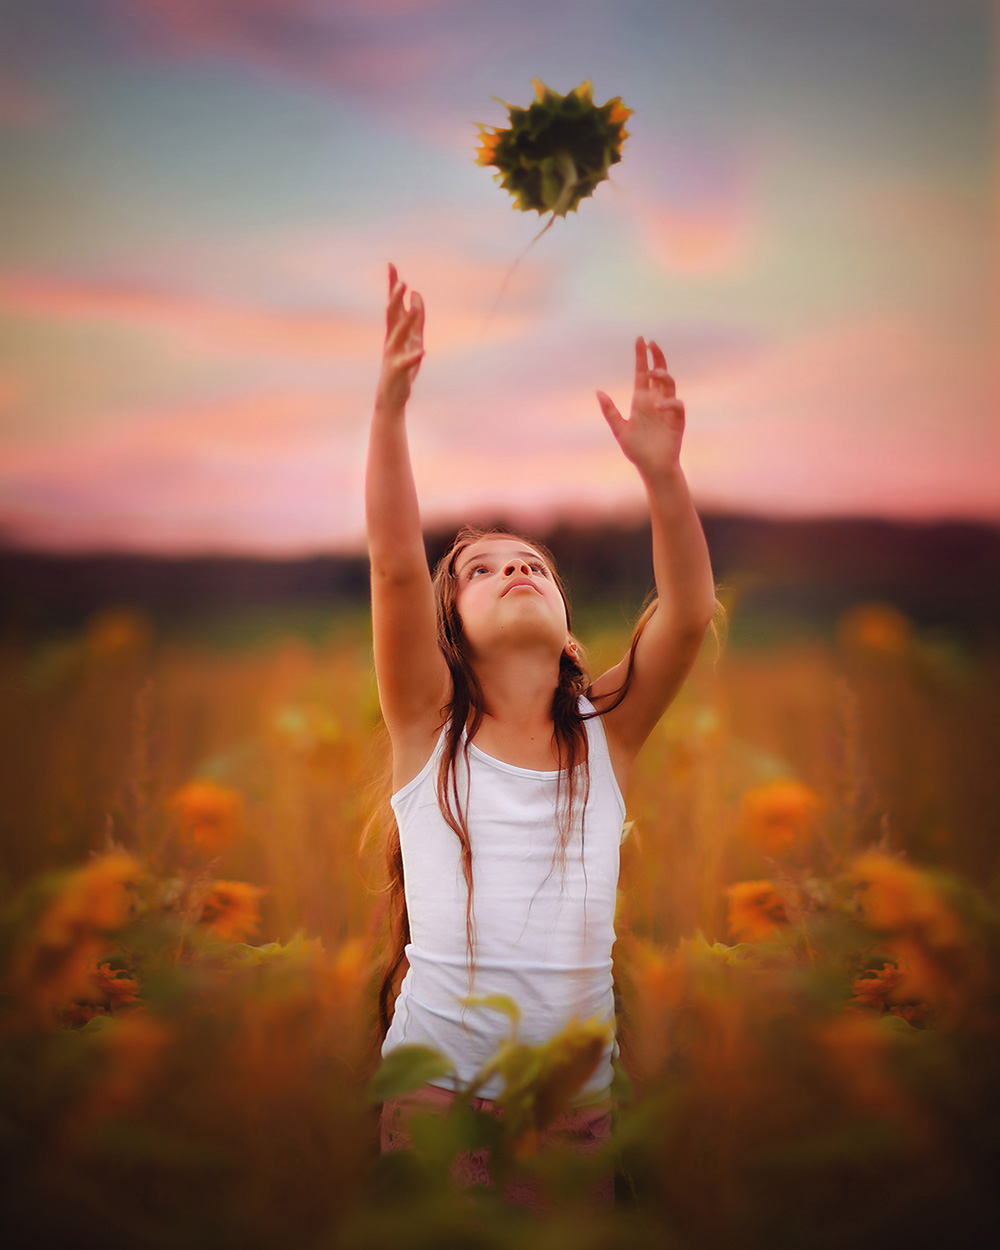 image of a girl in a field of sunflowers by Willie Kers of GlamourKidz Photography the netherlands